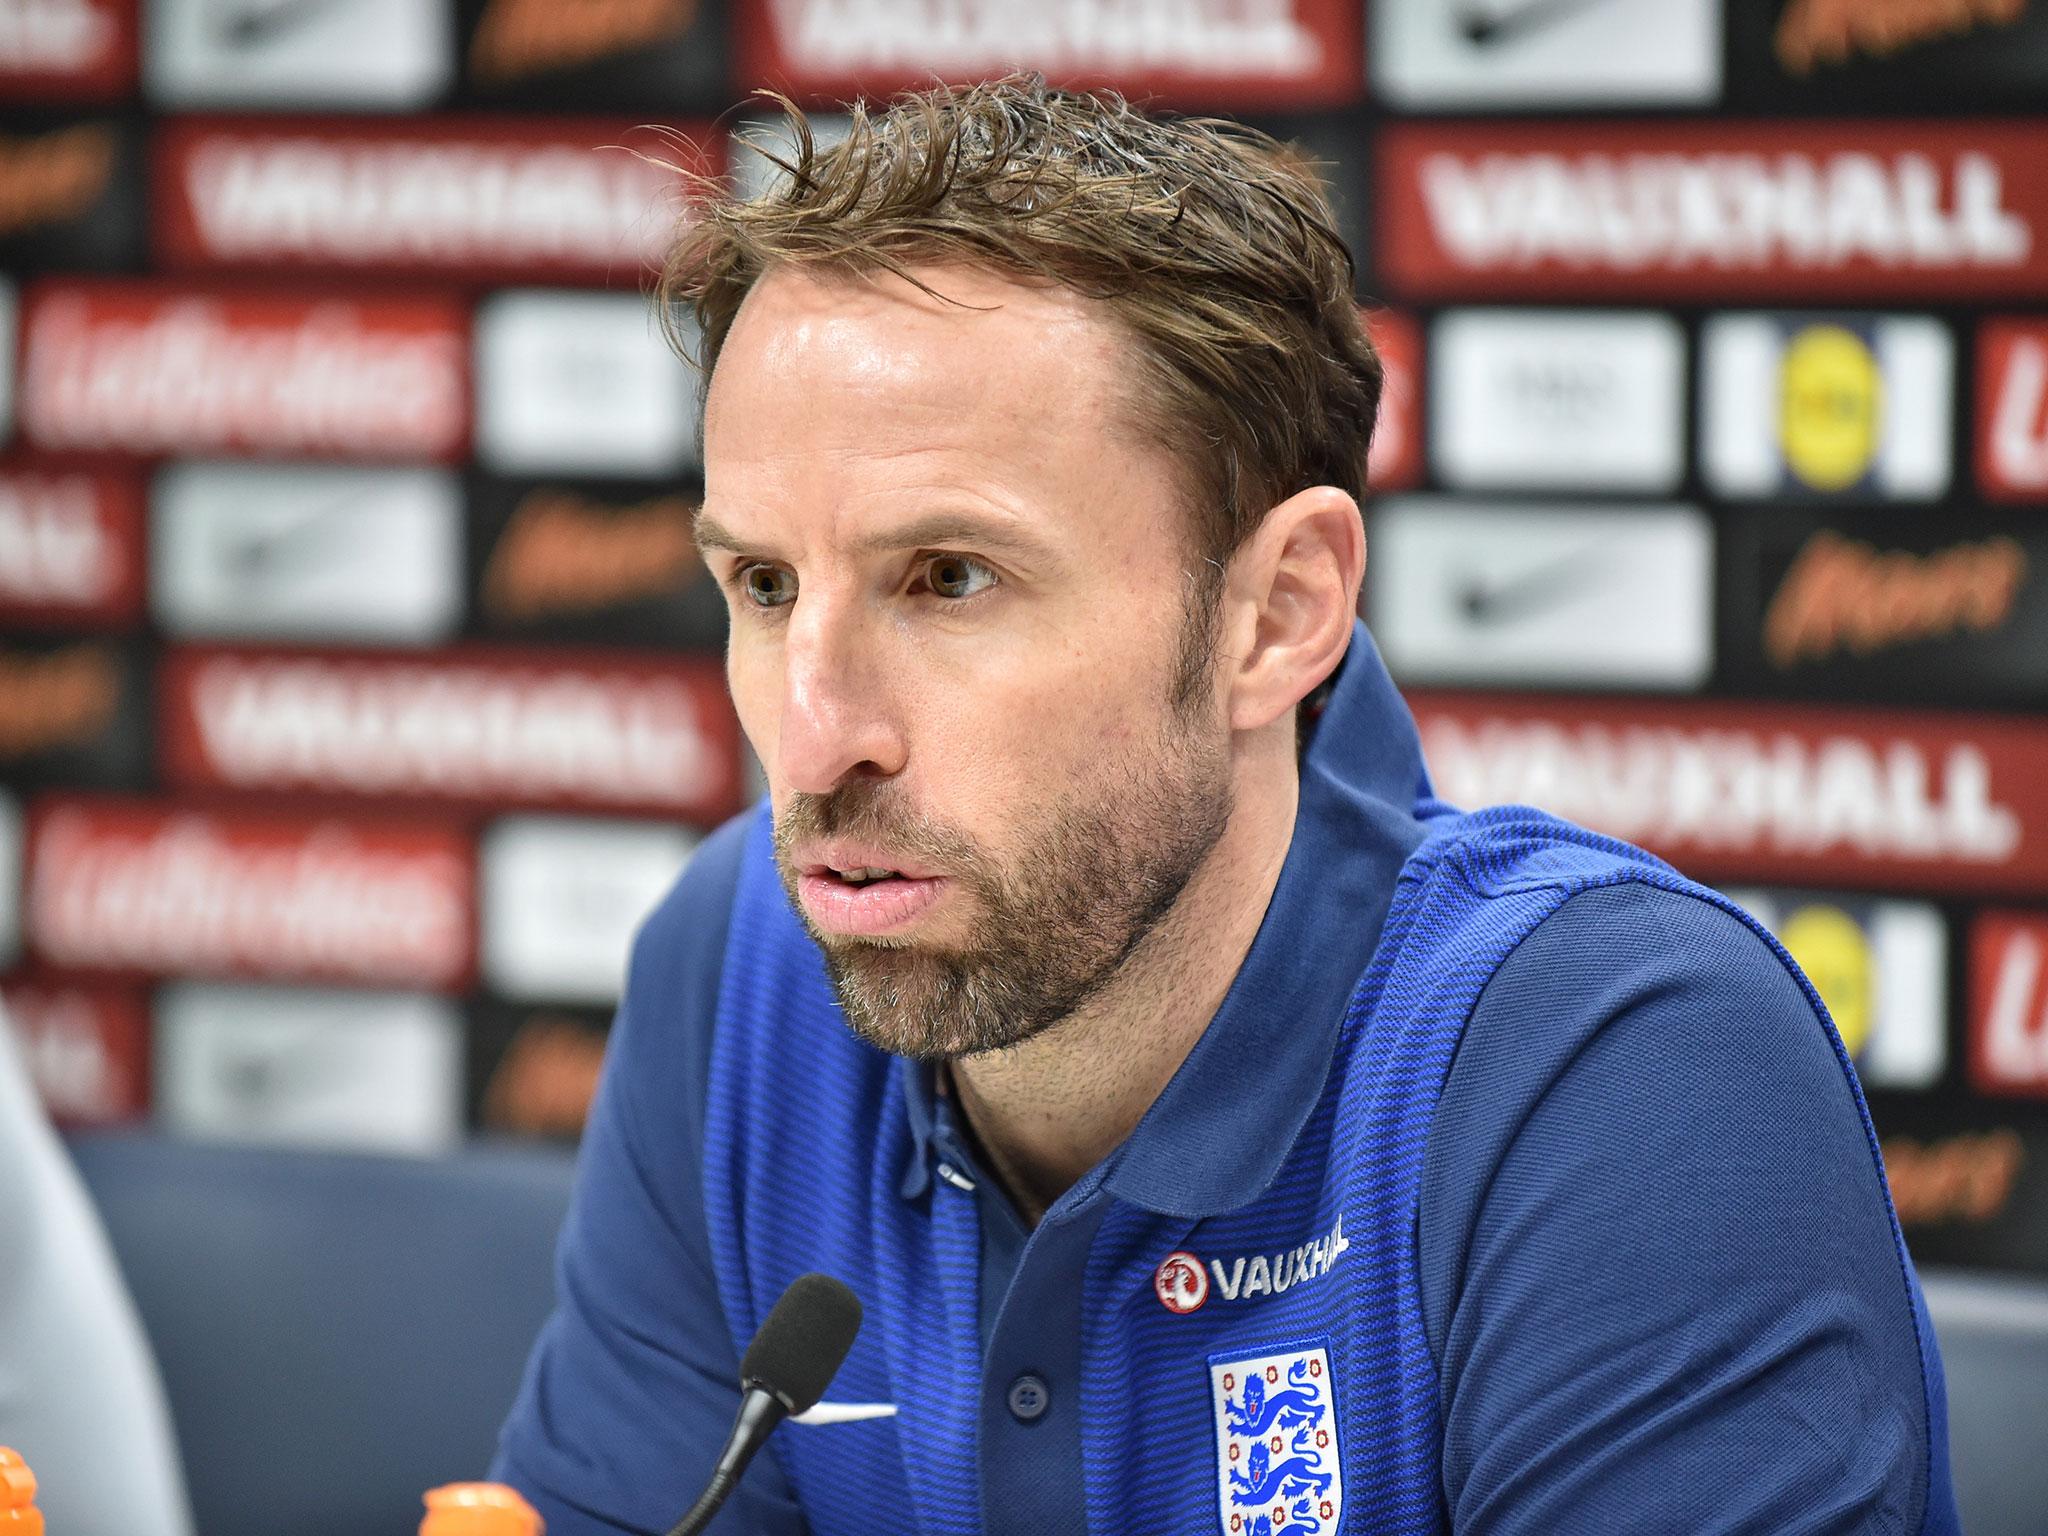 Gareth Southgate will be offered the chance to become England manager on a permanent basis